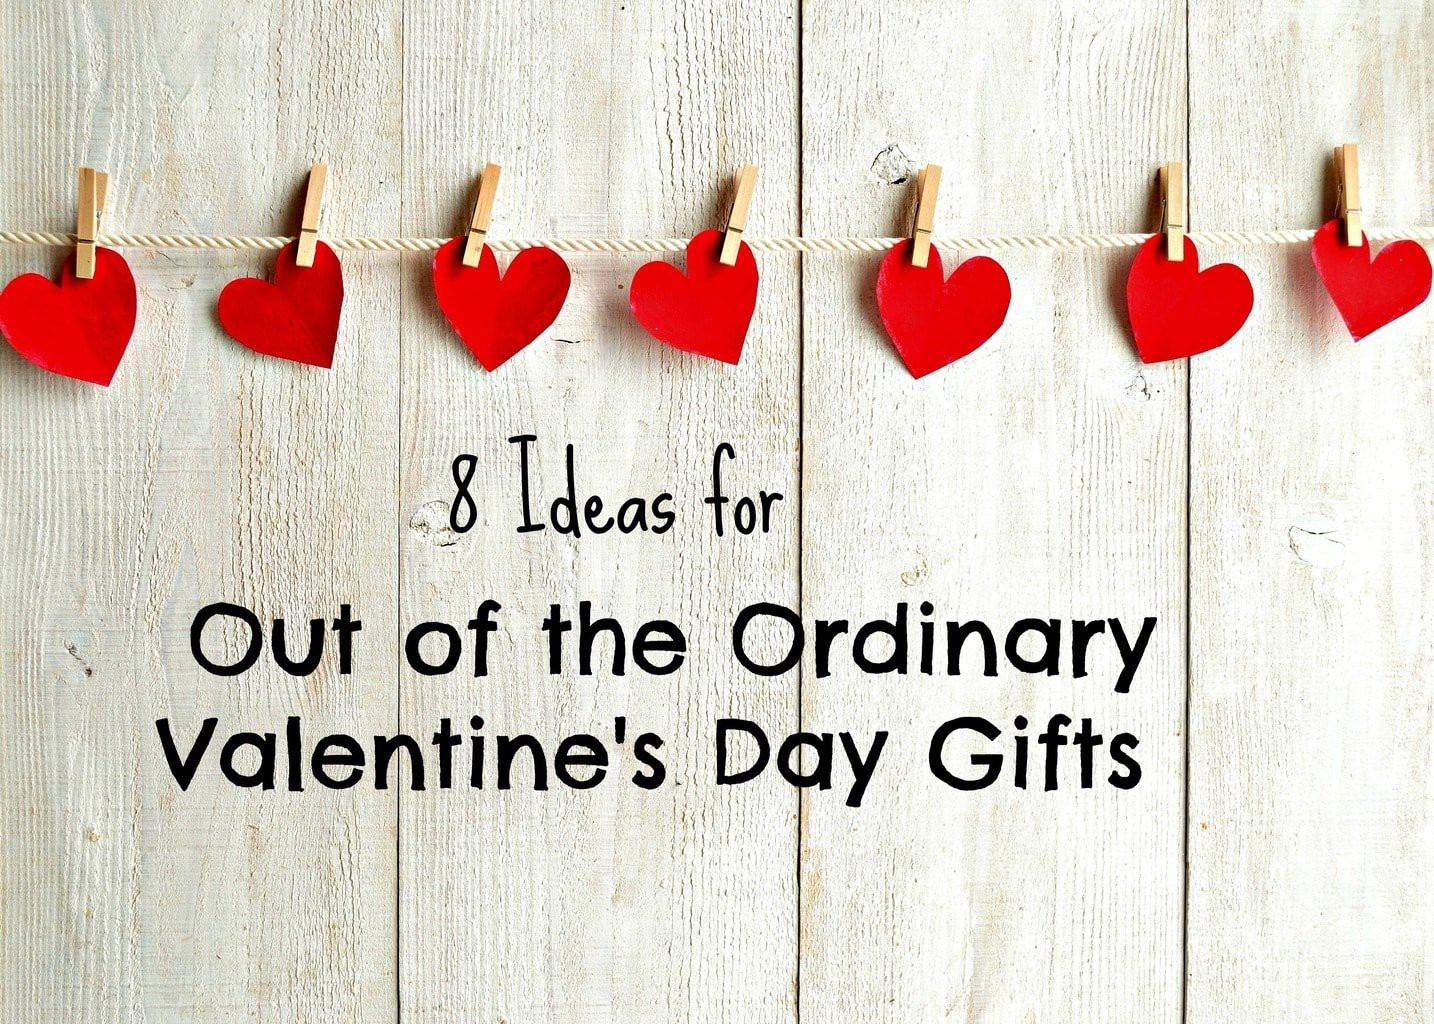 Cheap Valentines Day Dates Ideas
 Inexpensive Date Night Ideas for Valentine s Day